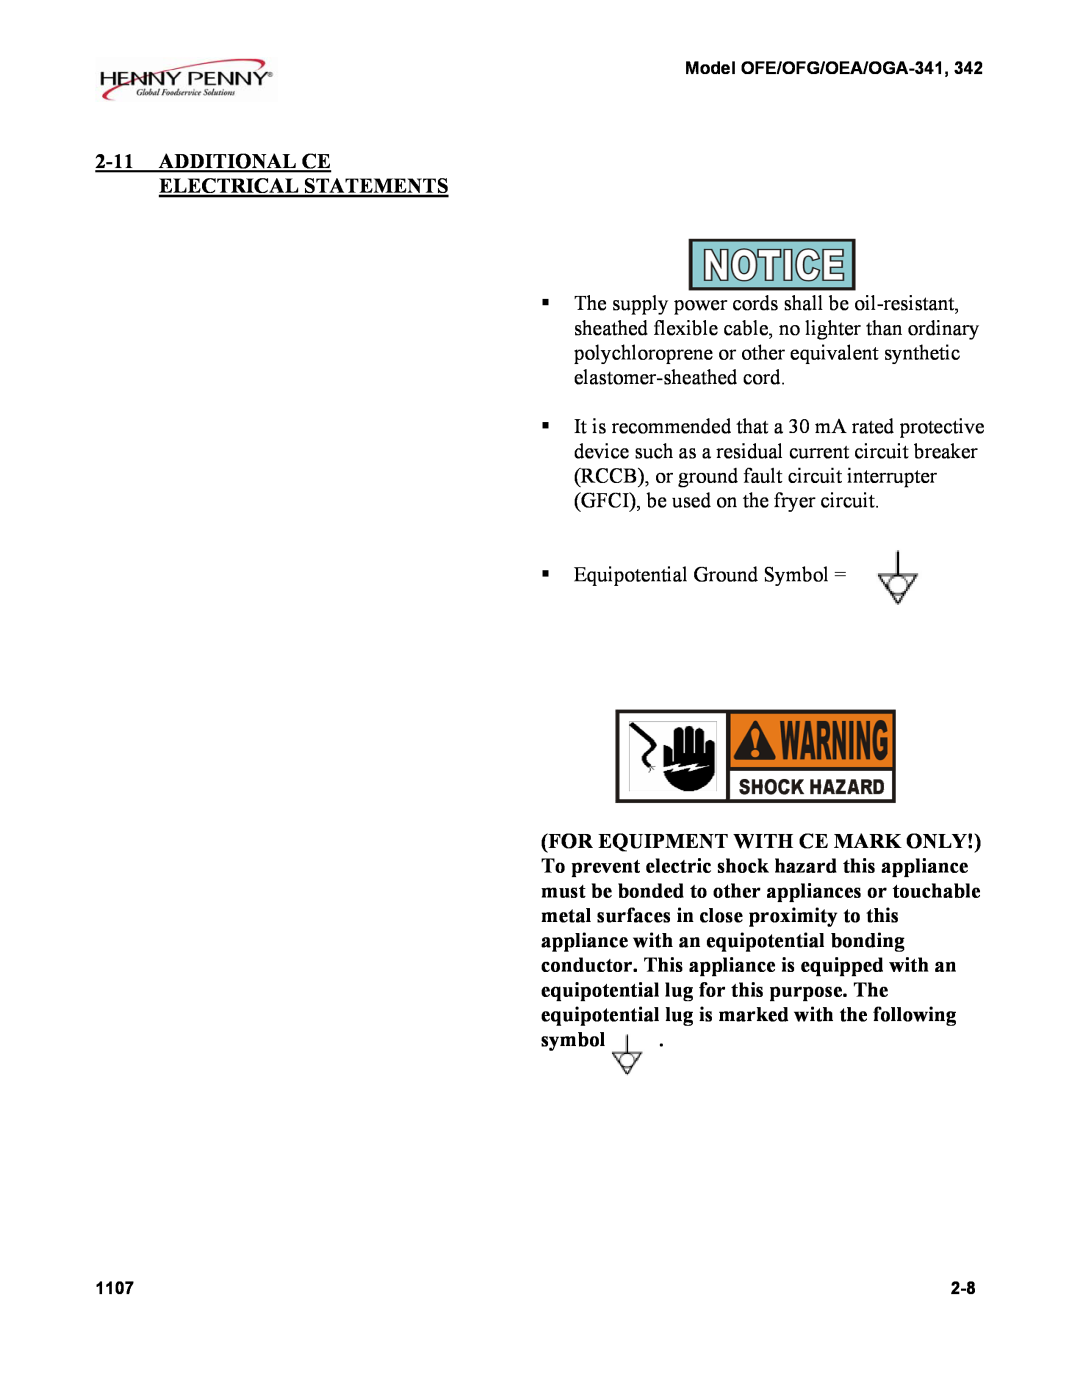 Henny Penny OFE-341 installation instructions Additional Ce Electrical Statements, symbol 